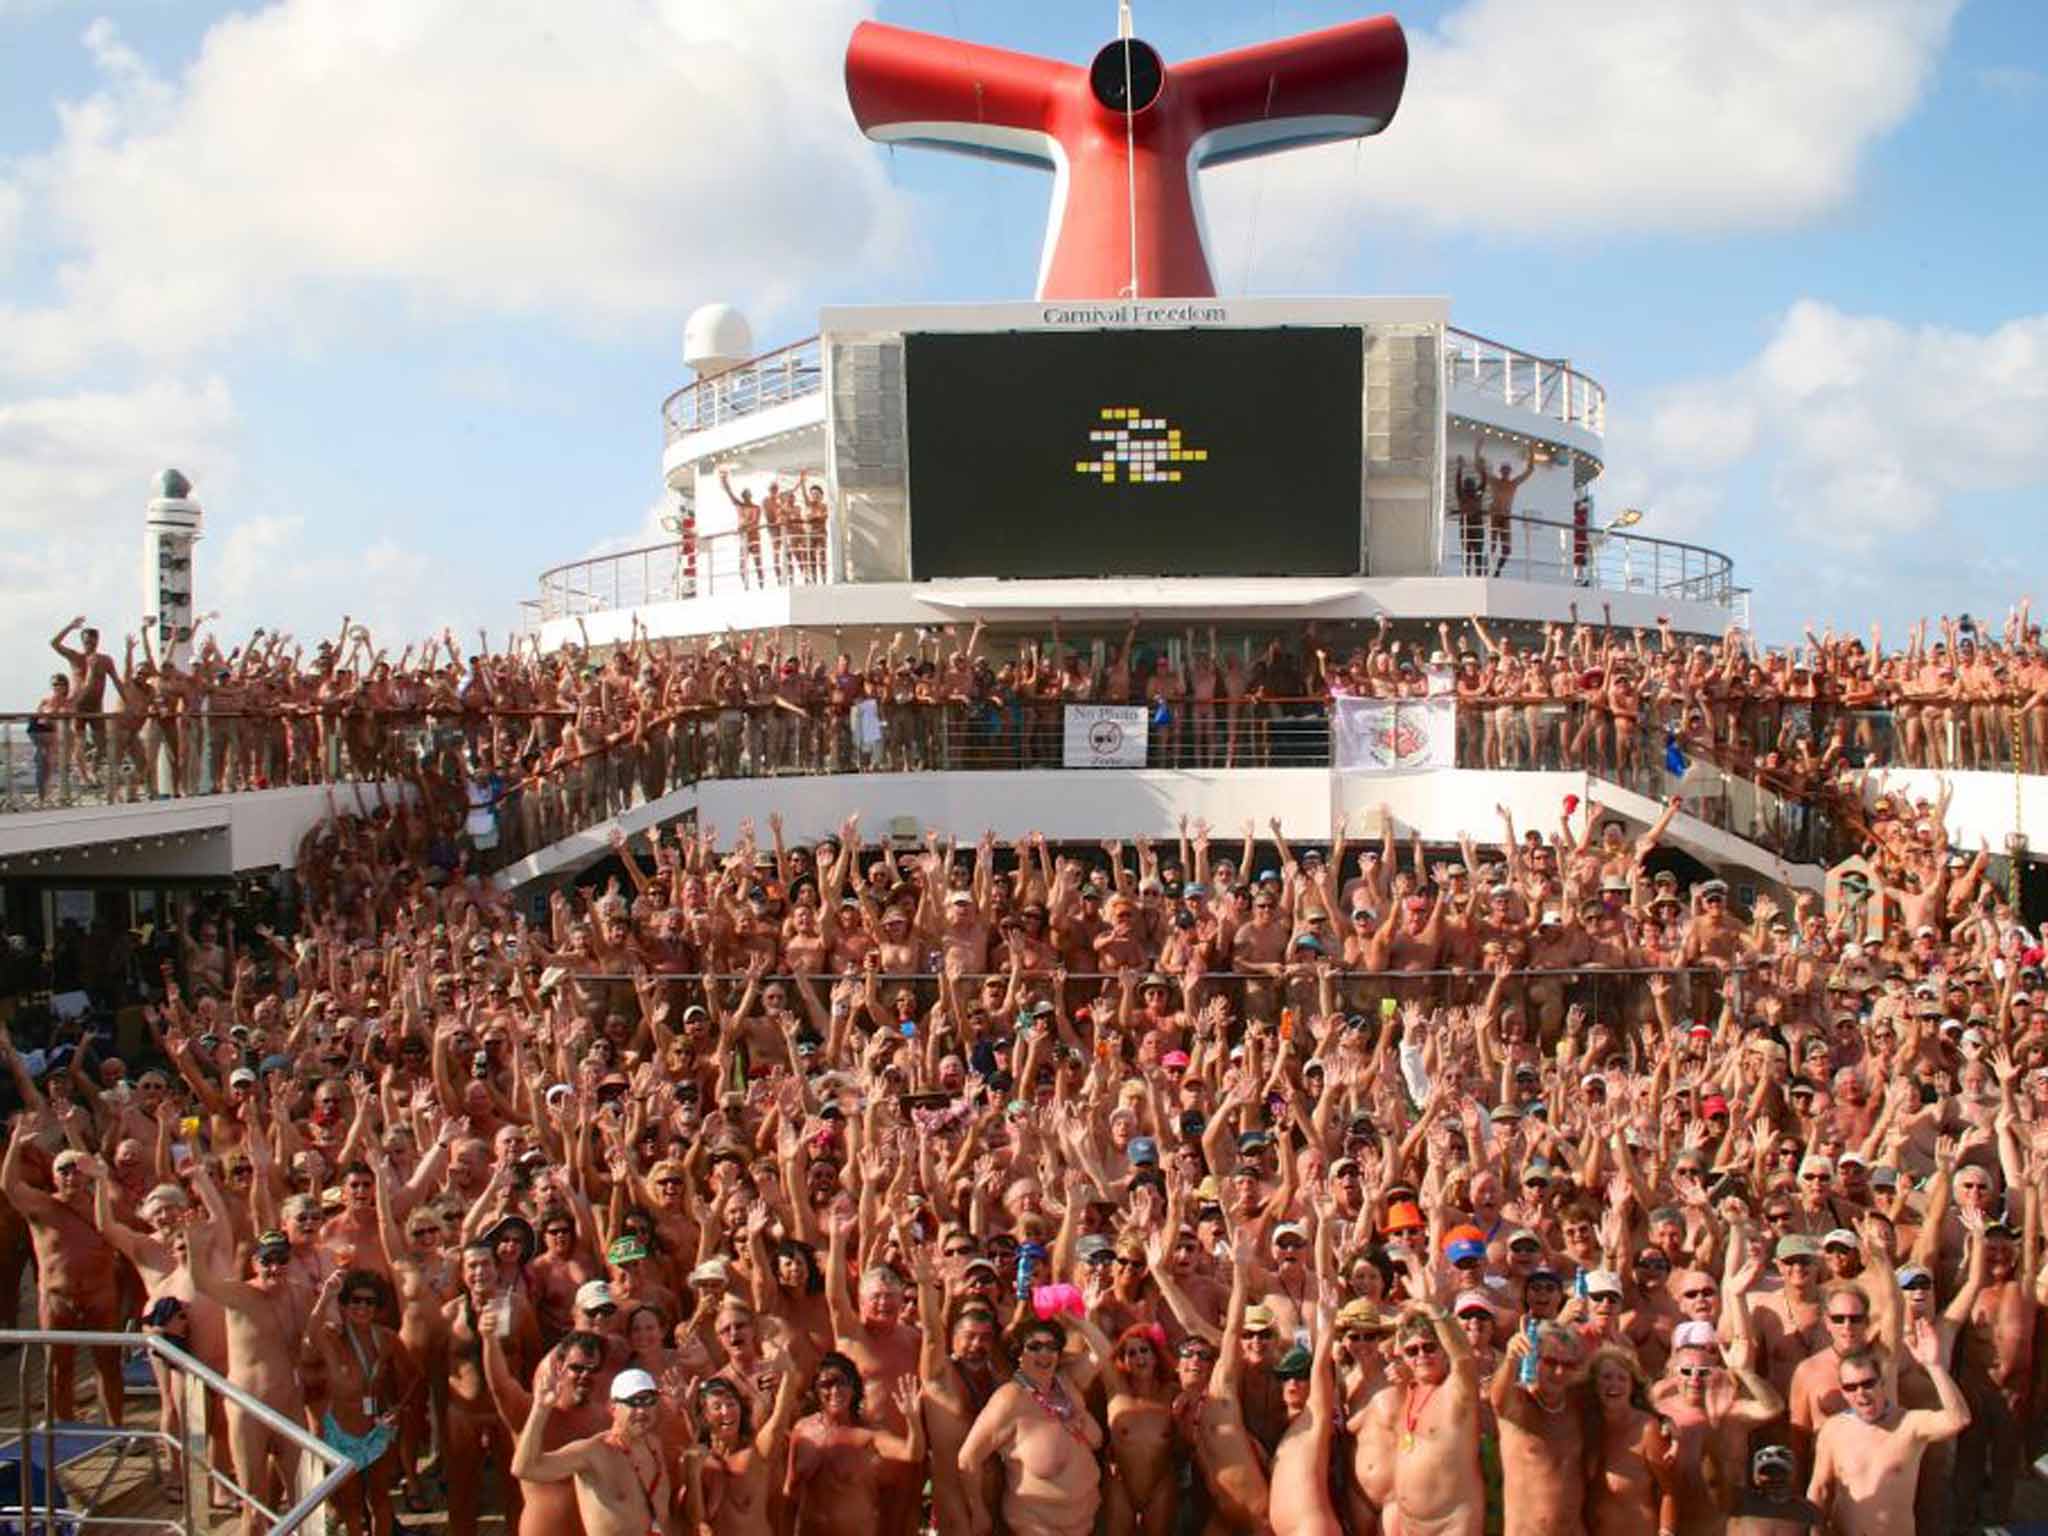 South Beach Coeds Nude - Nudist cruise ship: What's it like on a boat with 2,000 ...